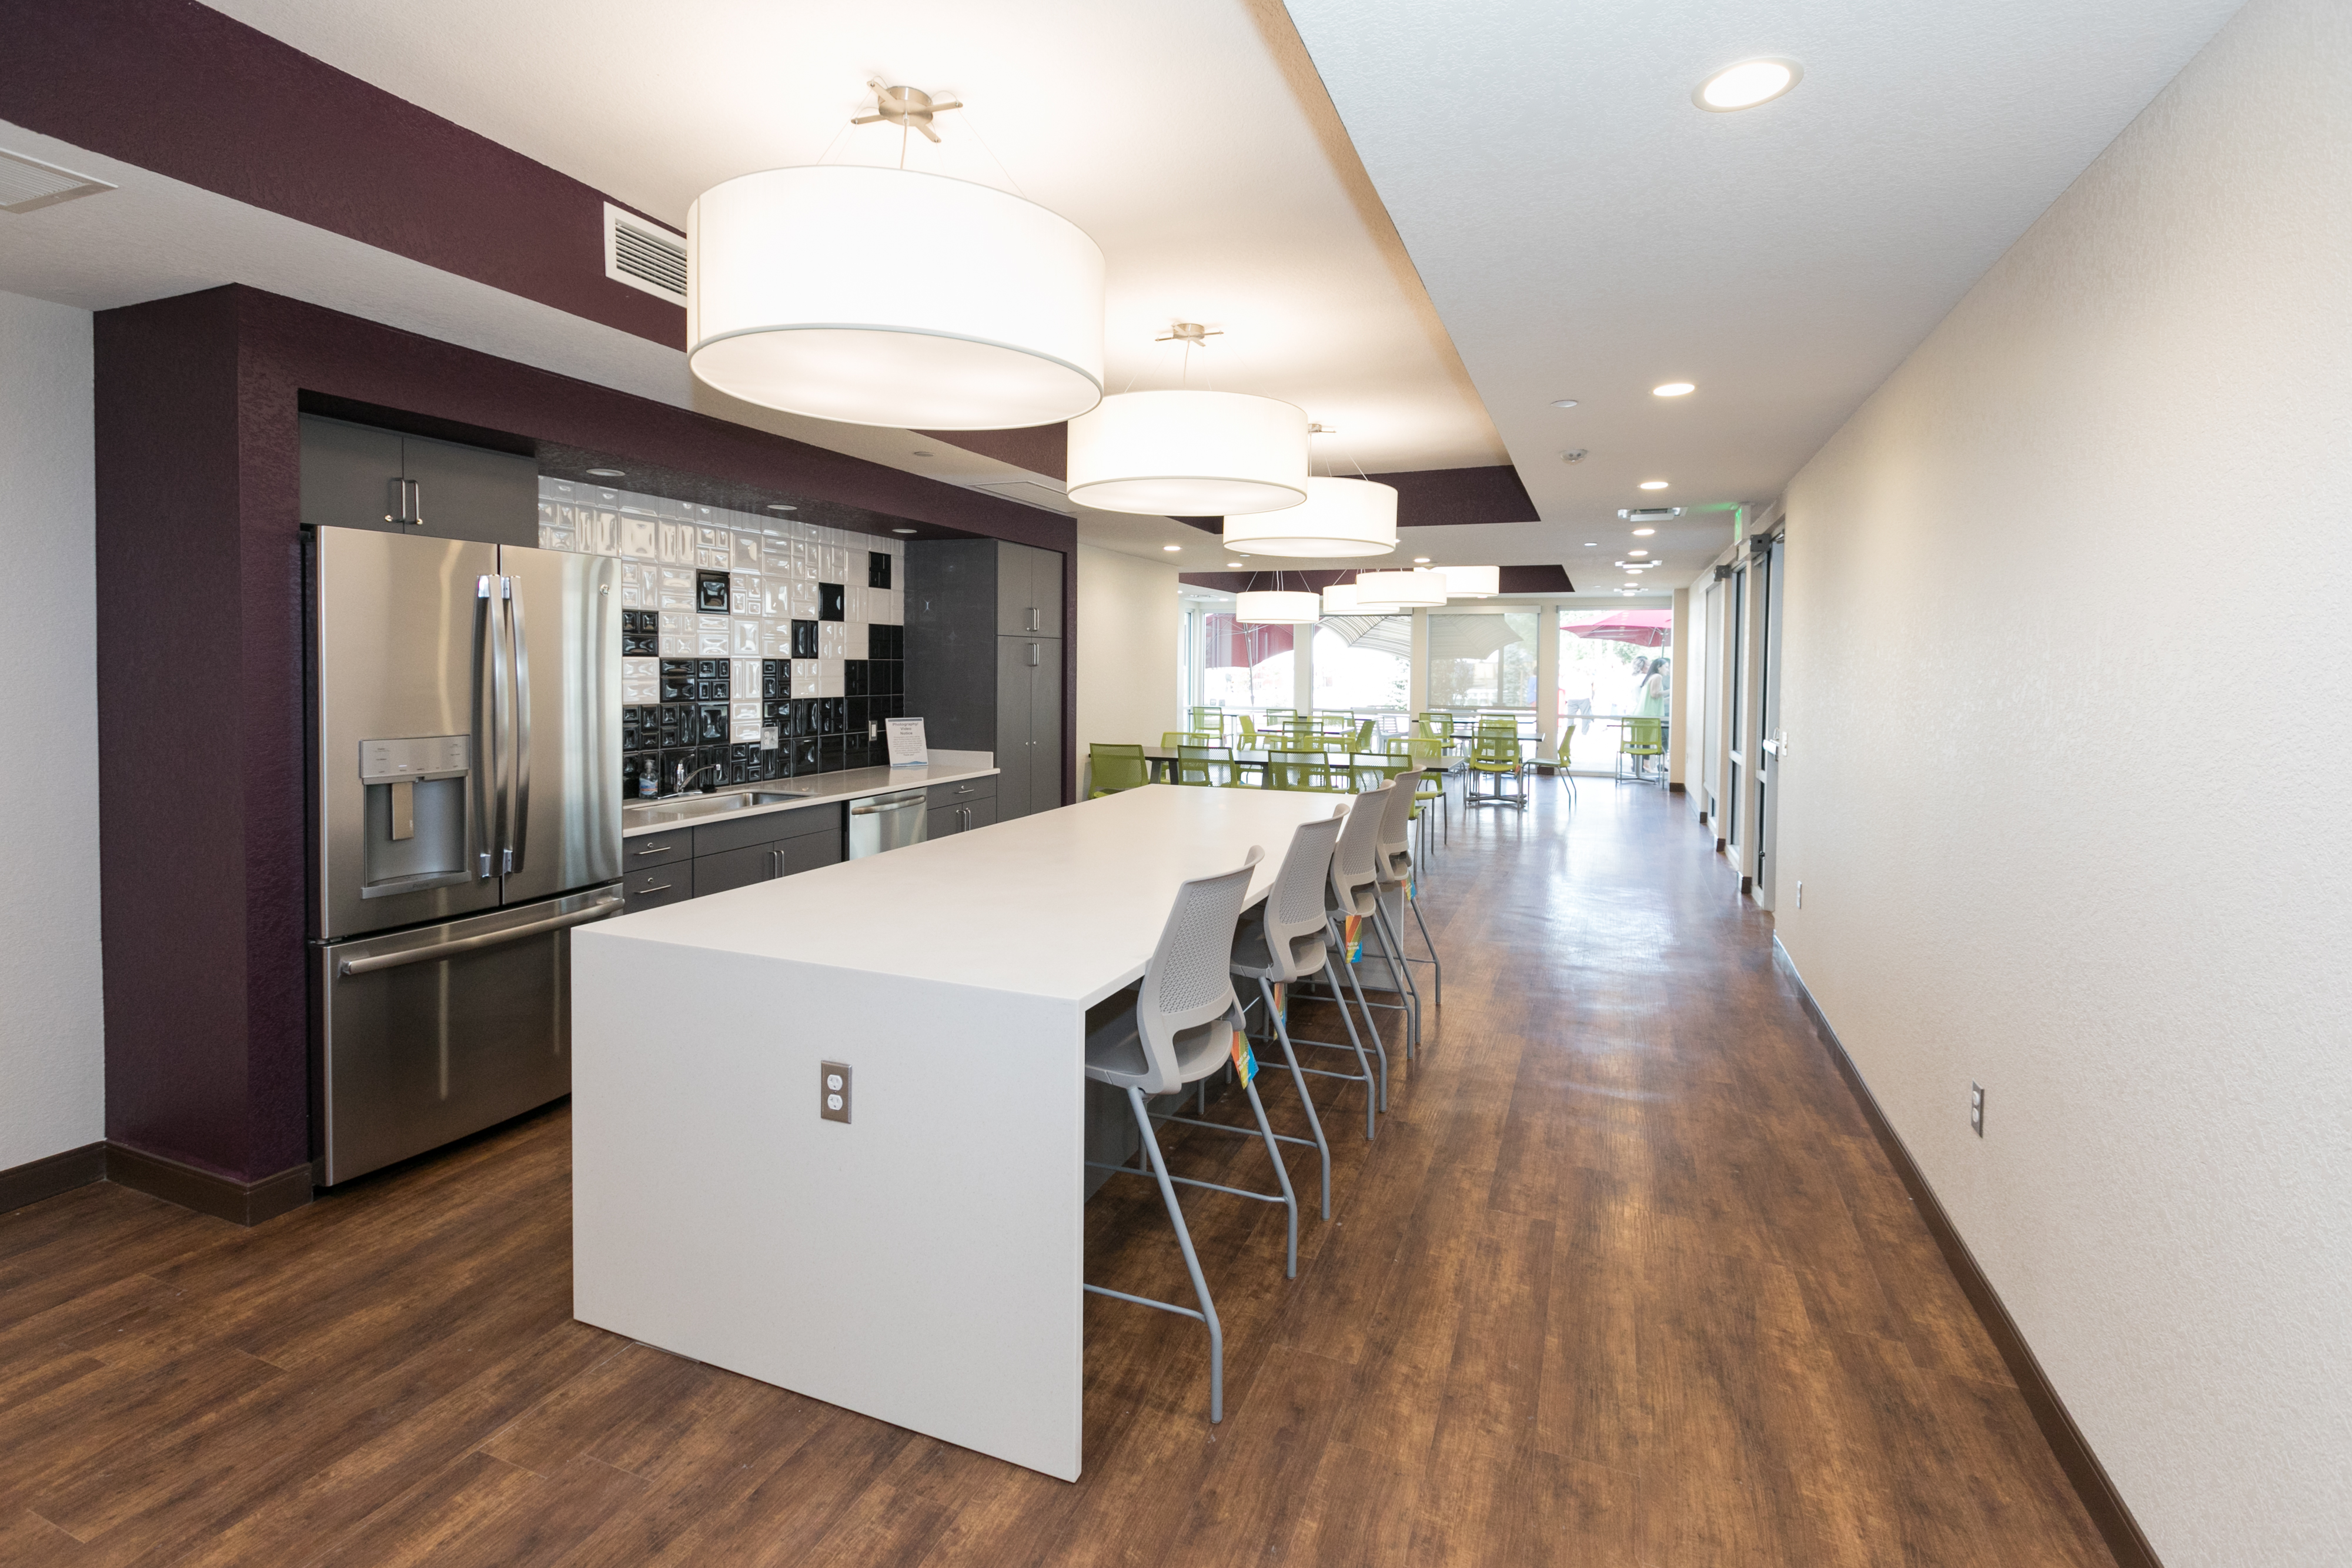 Image of the community room at Sanderson Apartments. There is a white kitchen countertop with gray stools, a refrigerator behind the counter, and a backsplash counter with a sink.